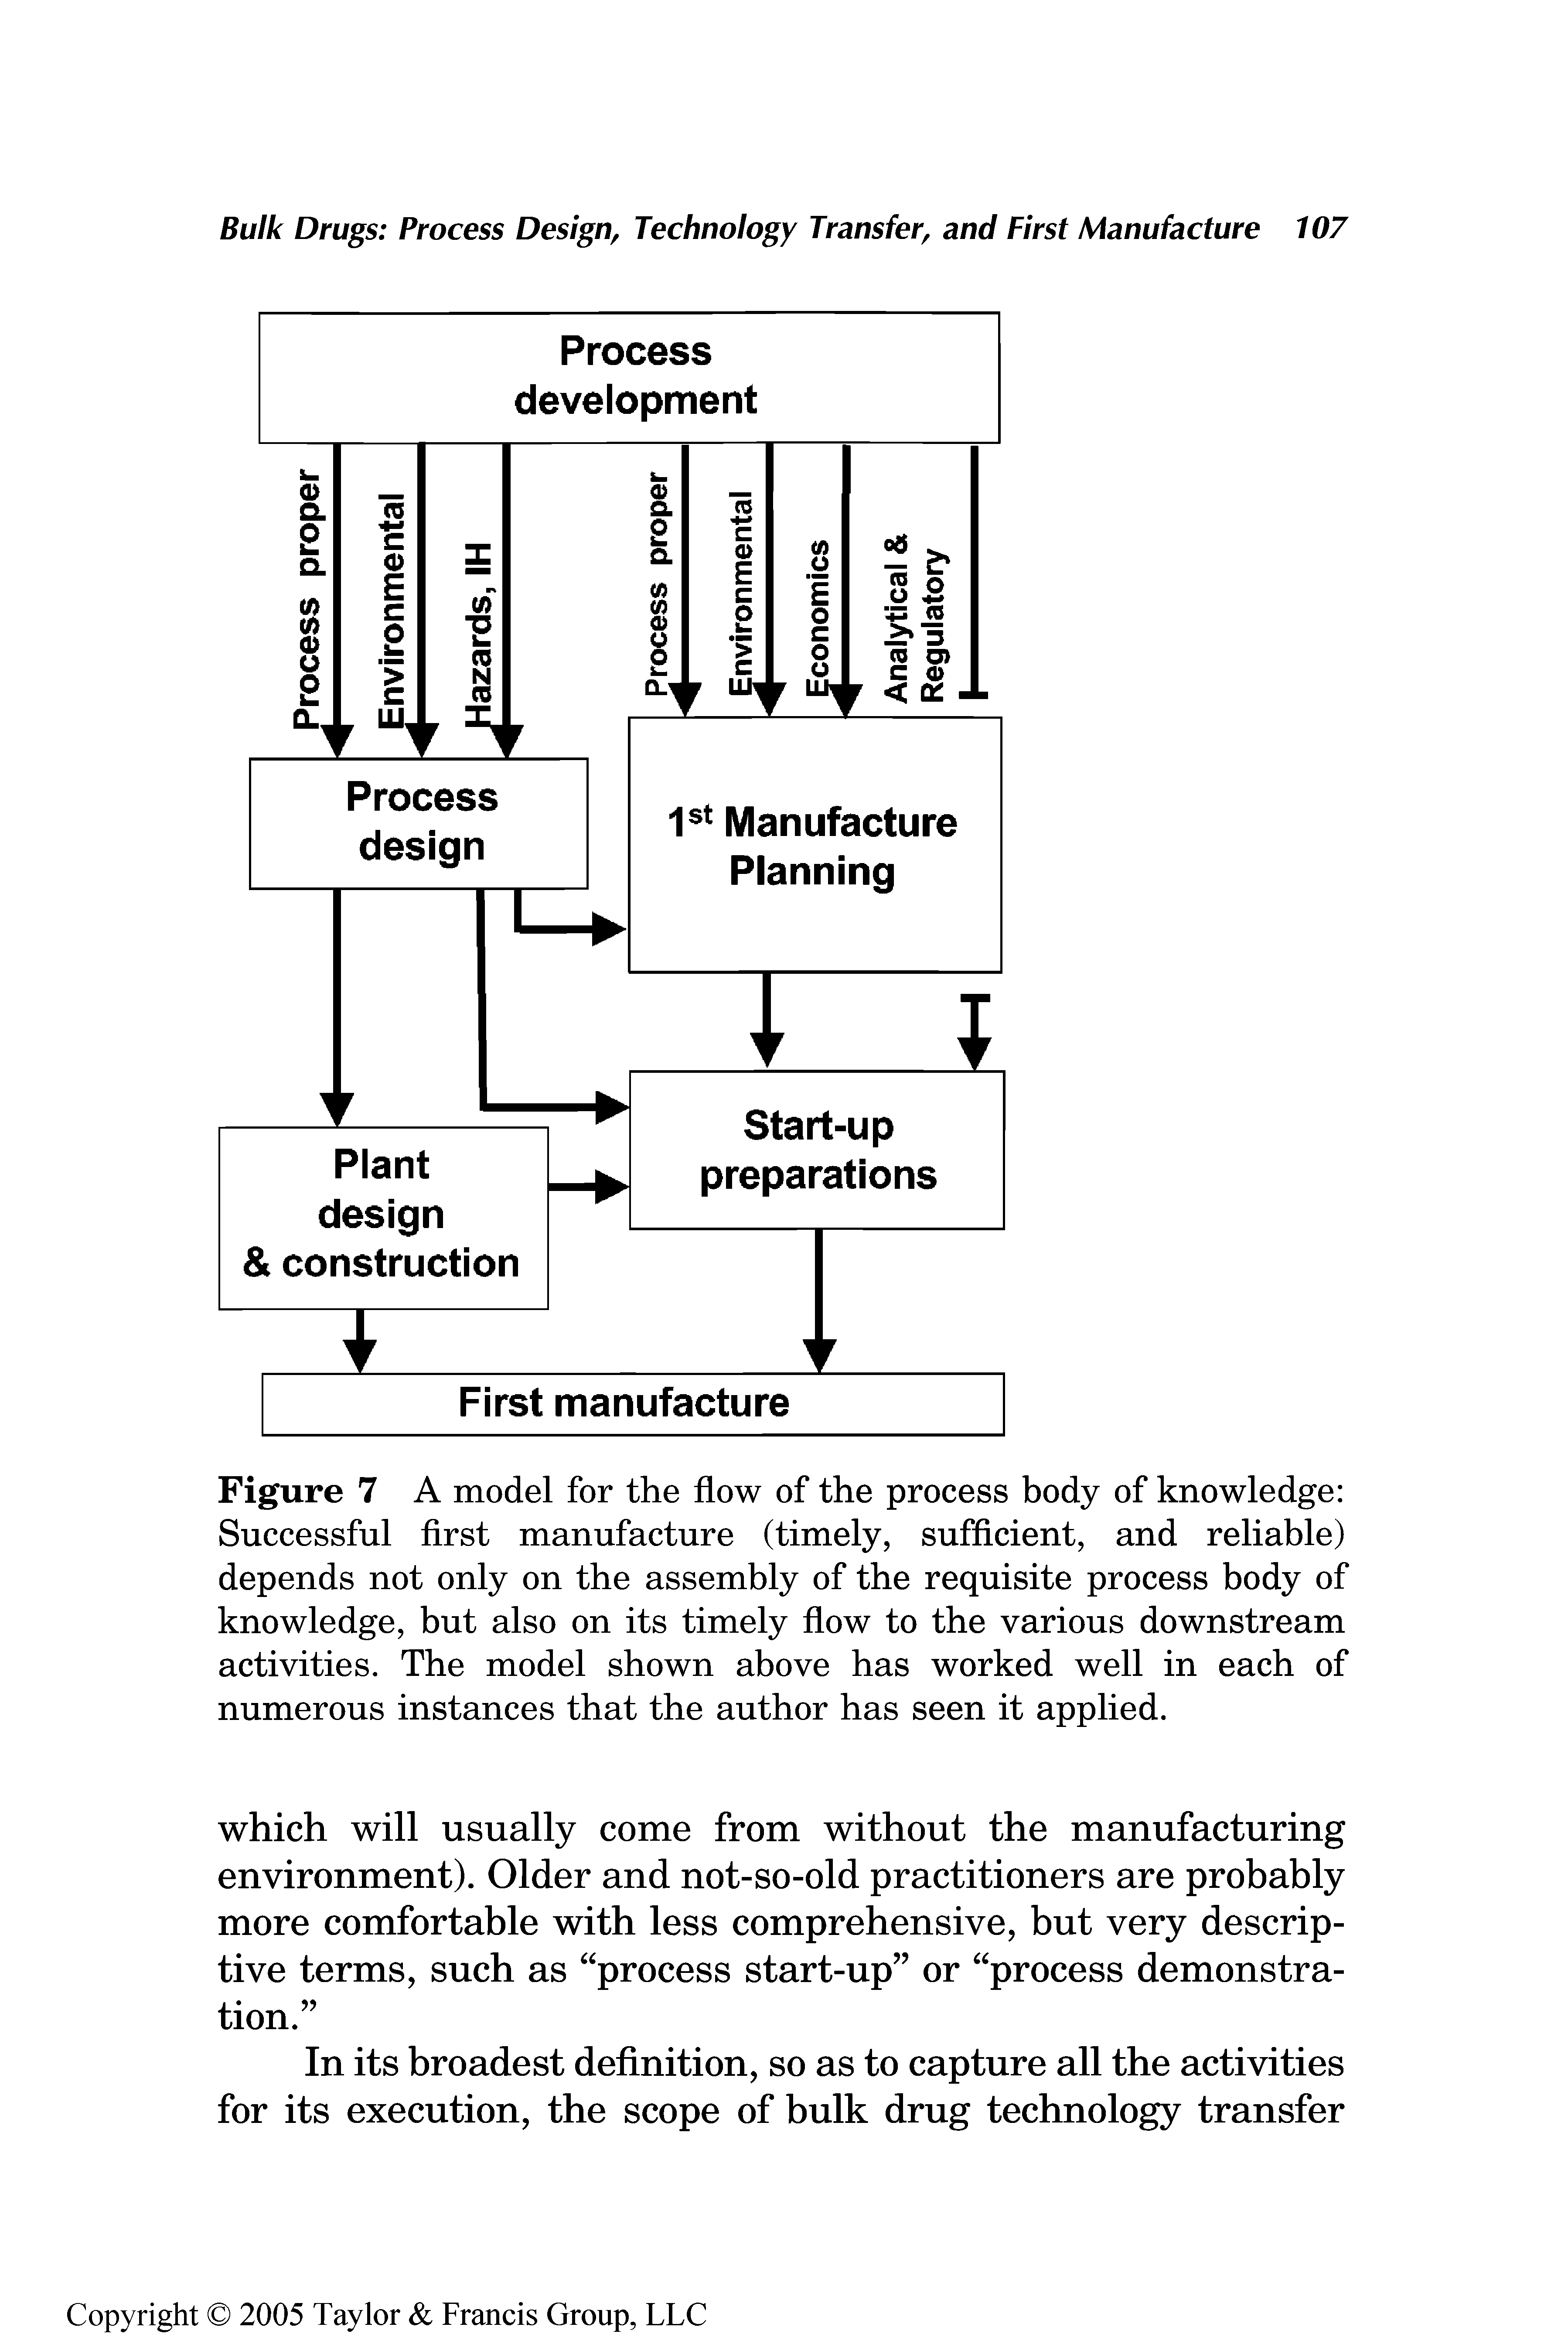 Figure 7 A model for the flow of the process body of knowledge Successful first manufacture (timely, sufficient, and reliable) depends not only on the assembly of the requisite process body of knowledge, but also on its timely flow to the various downstream activities. The model shown above has worked well in each of numerous instances that the author has seen it applied.